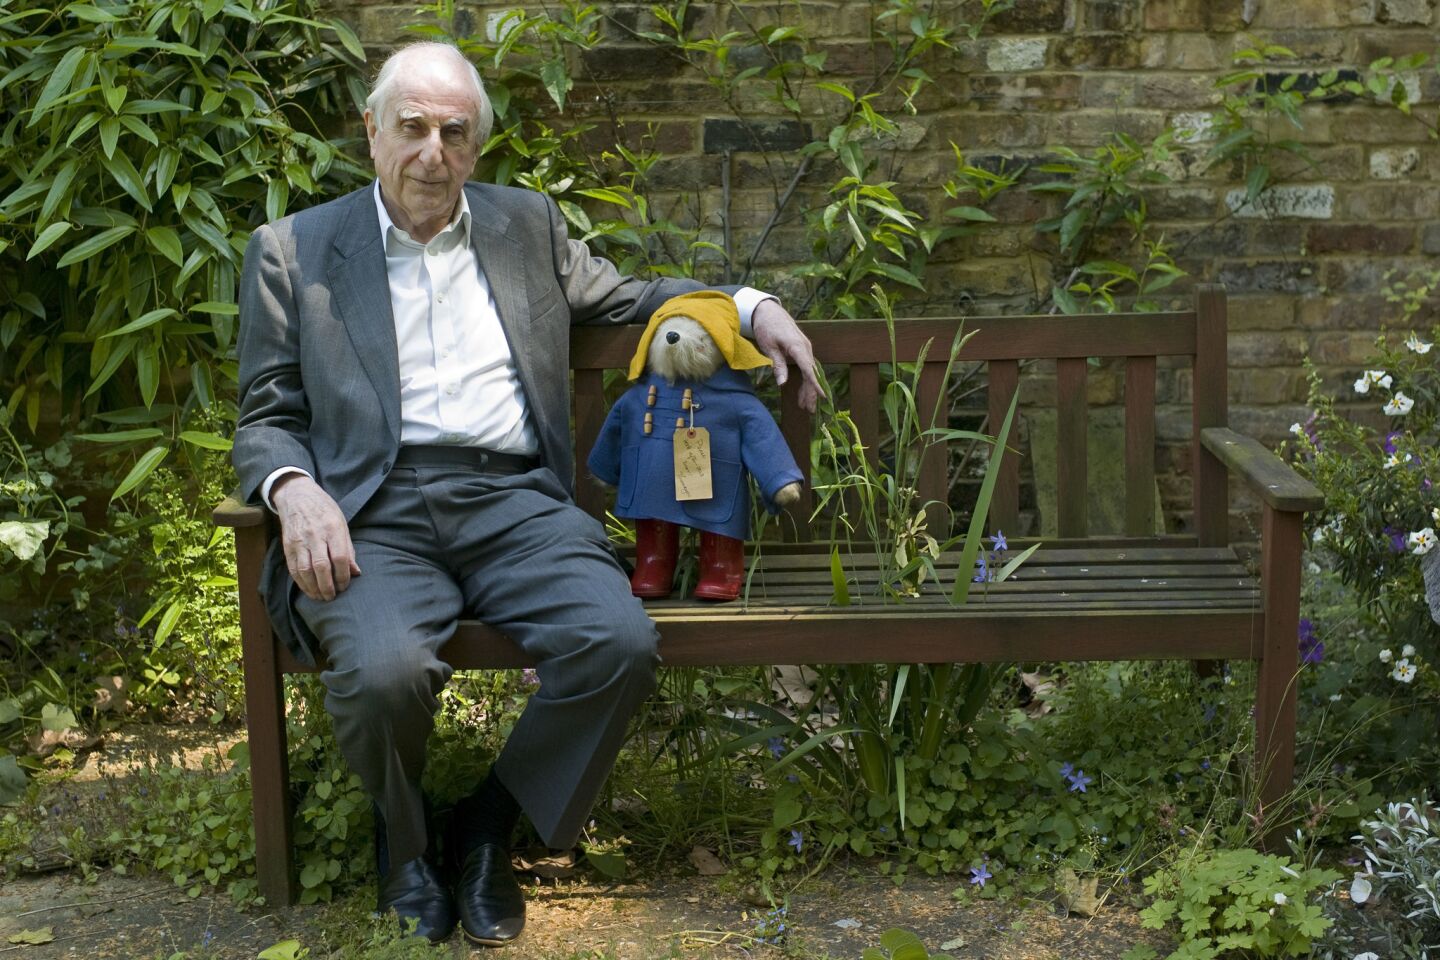 The British author created Paddington Bear, the marmalade-loving teddy in a duffel coat and floppy hat. His creation become an icon immortalized in print, on screens and as countless stuffed toys. Bond was 91. Full obituary